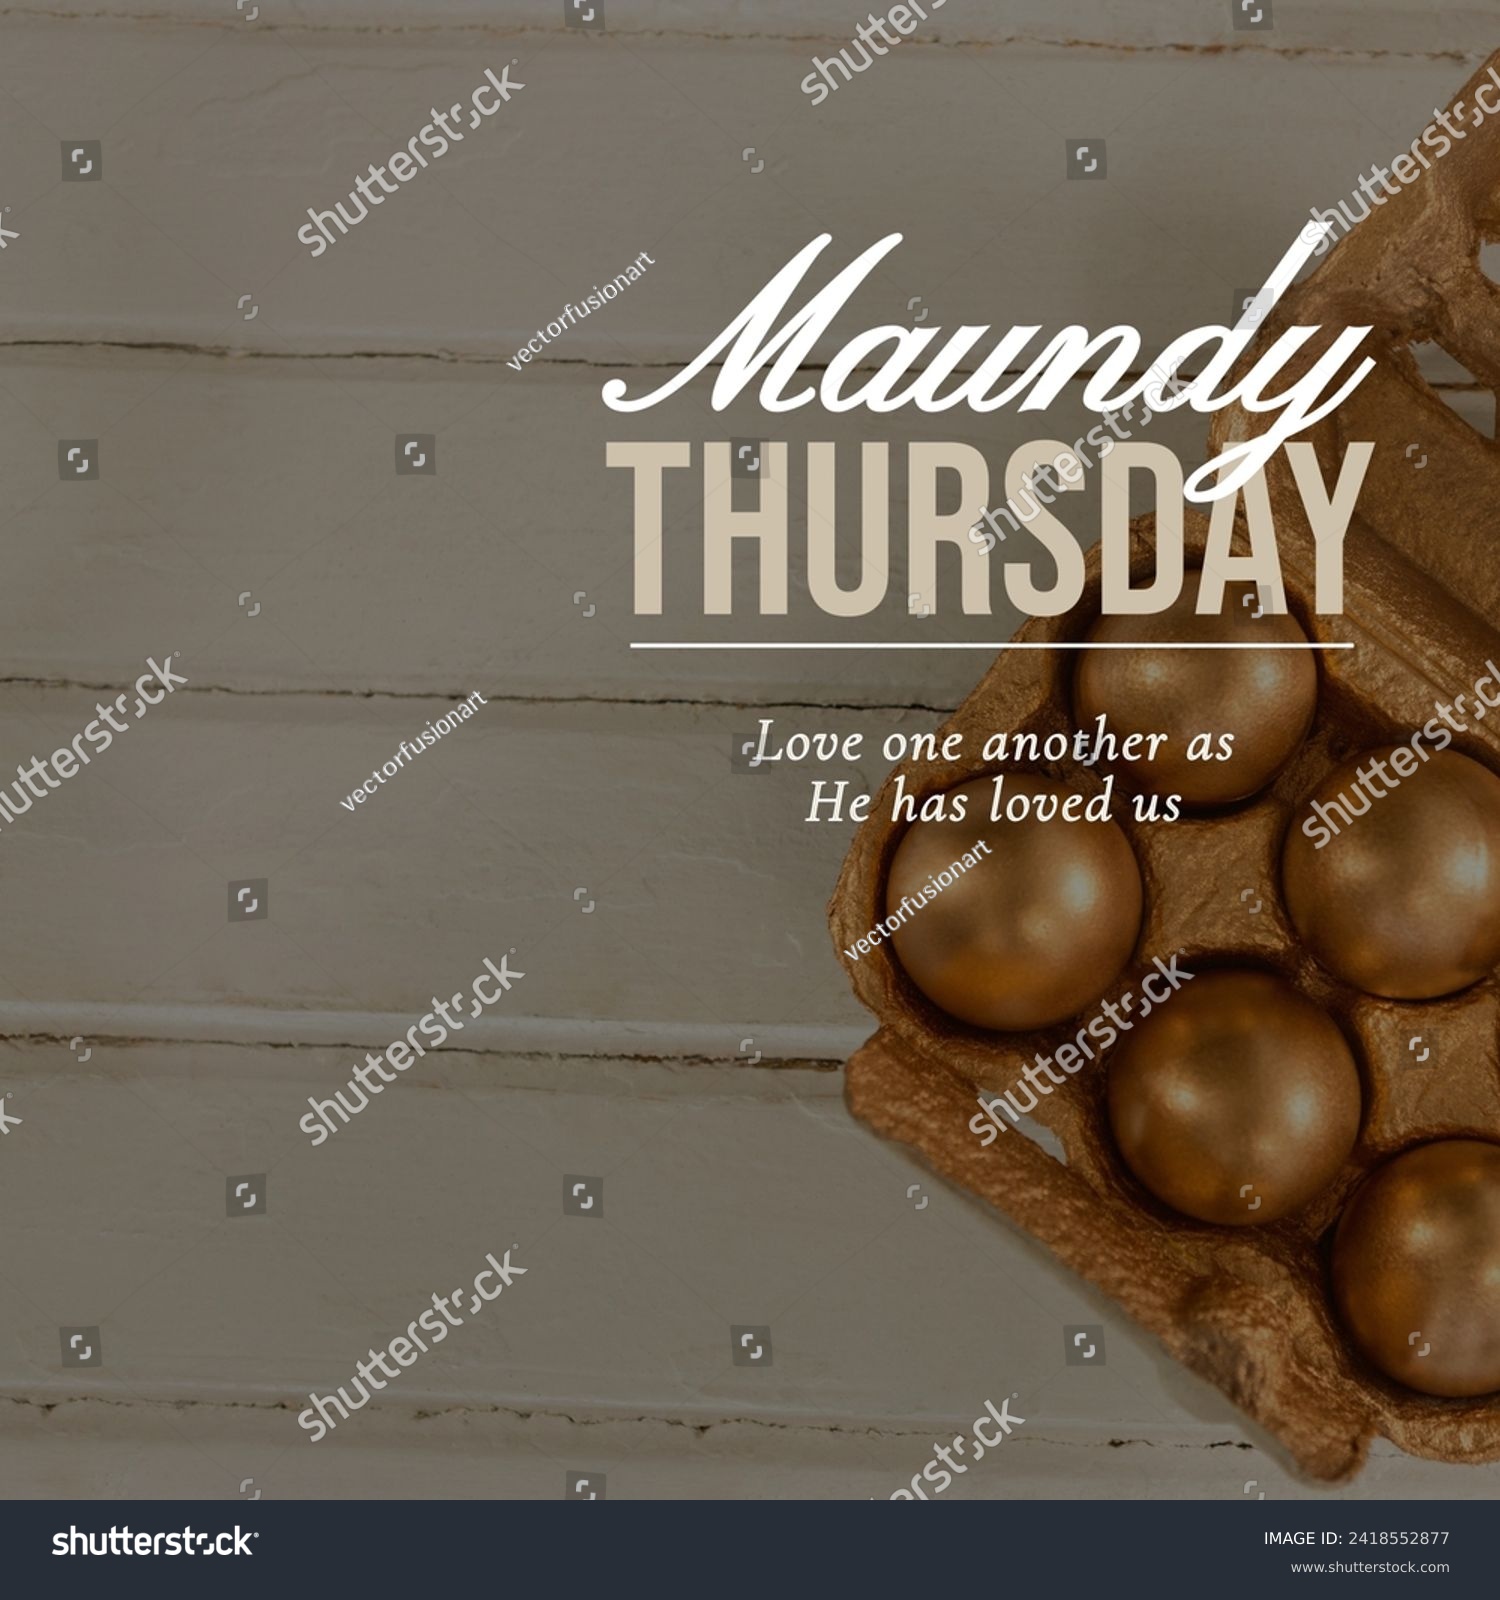 Composition of maundy thursday text over gold eggs on wooden background. Maundy thursday tradition and religion concept digitally generated image. #2418552877